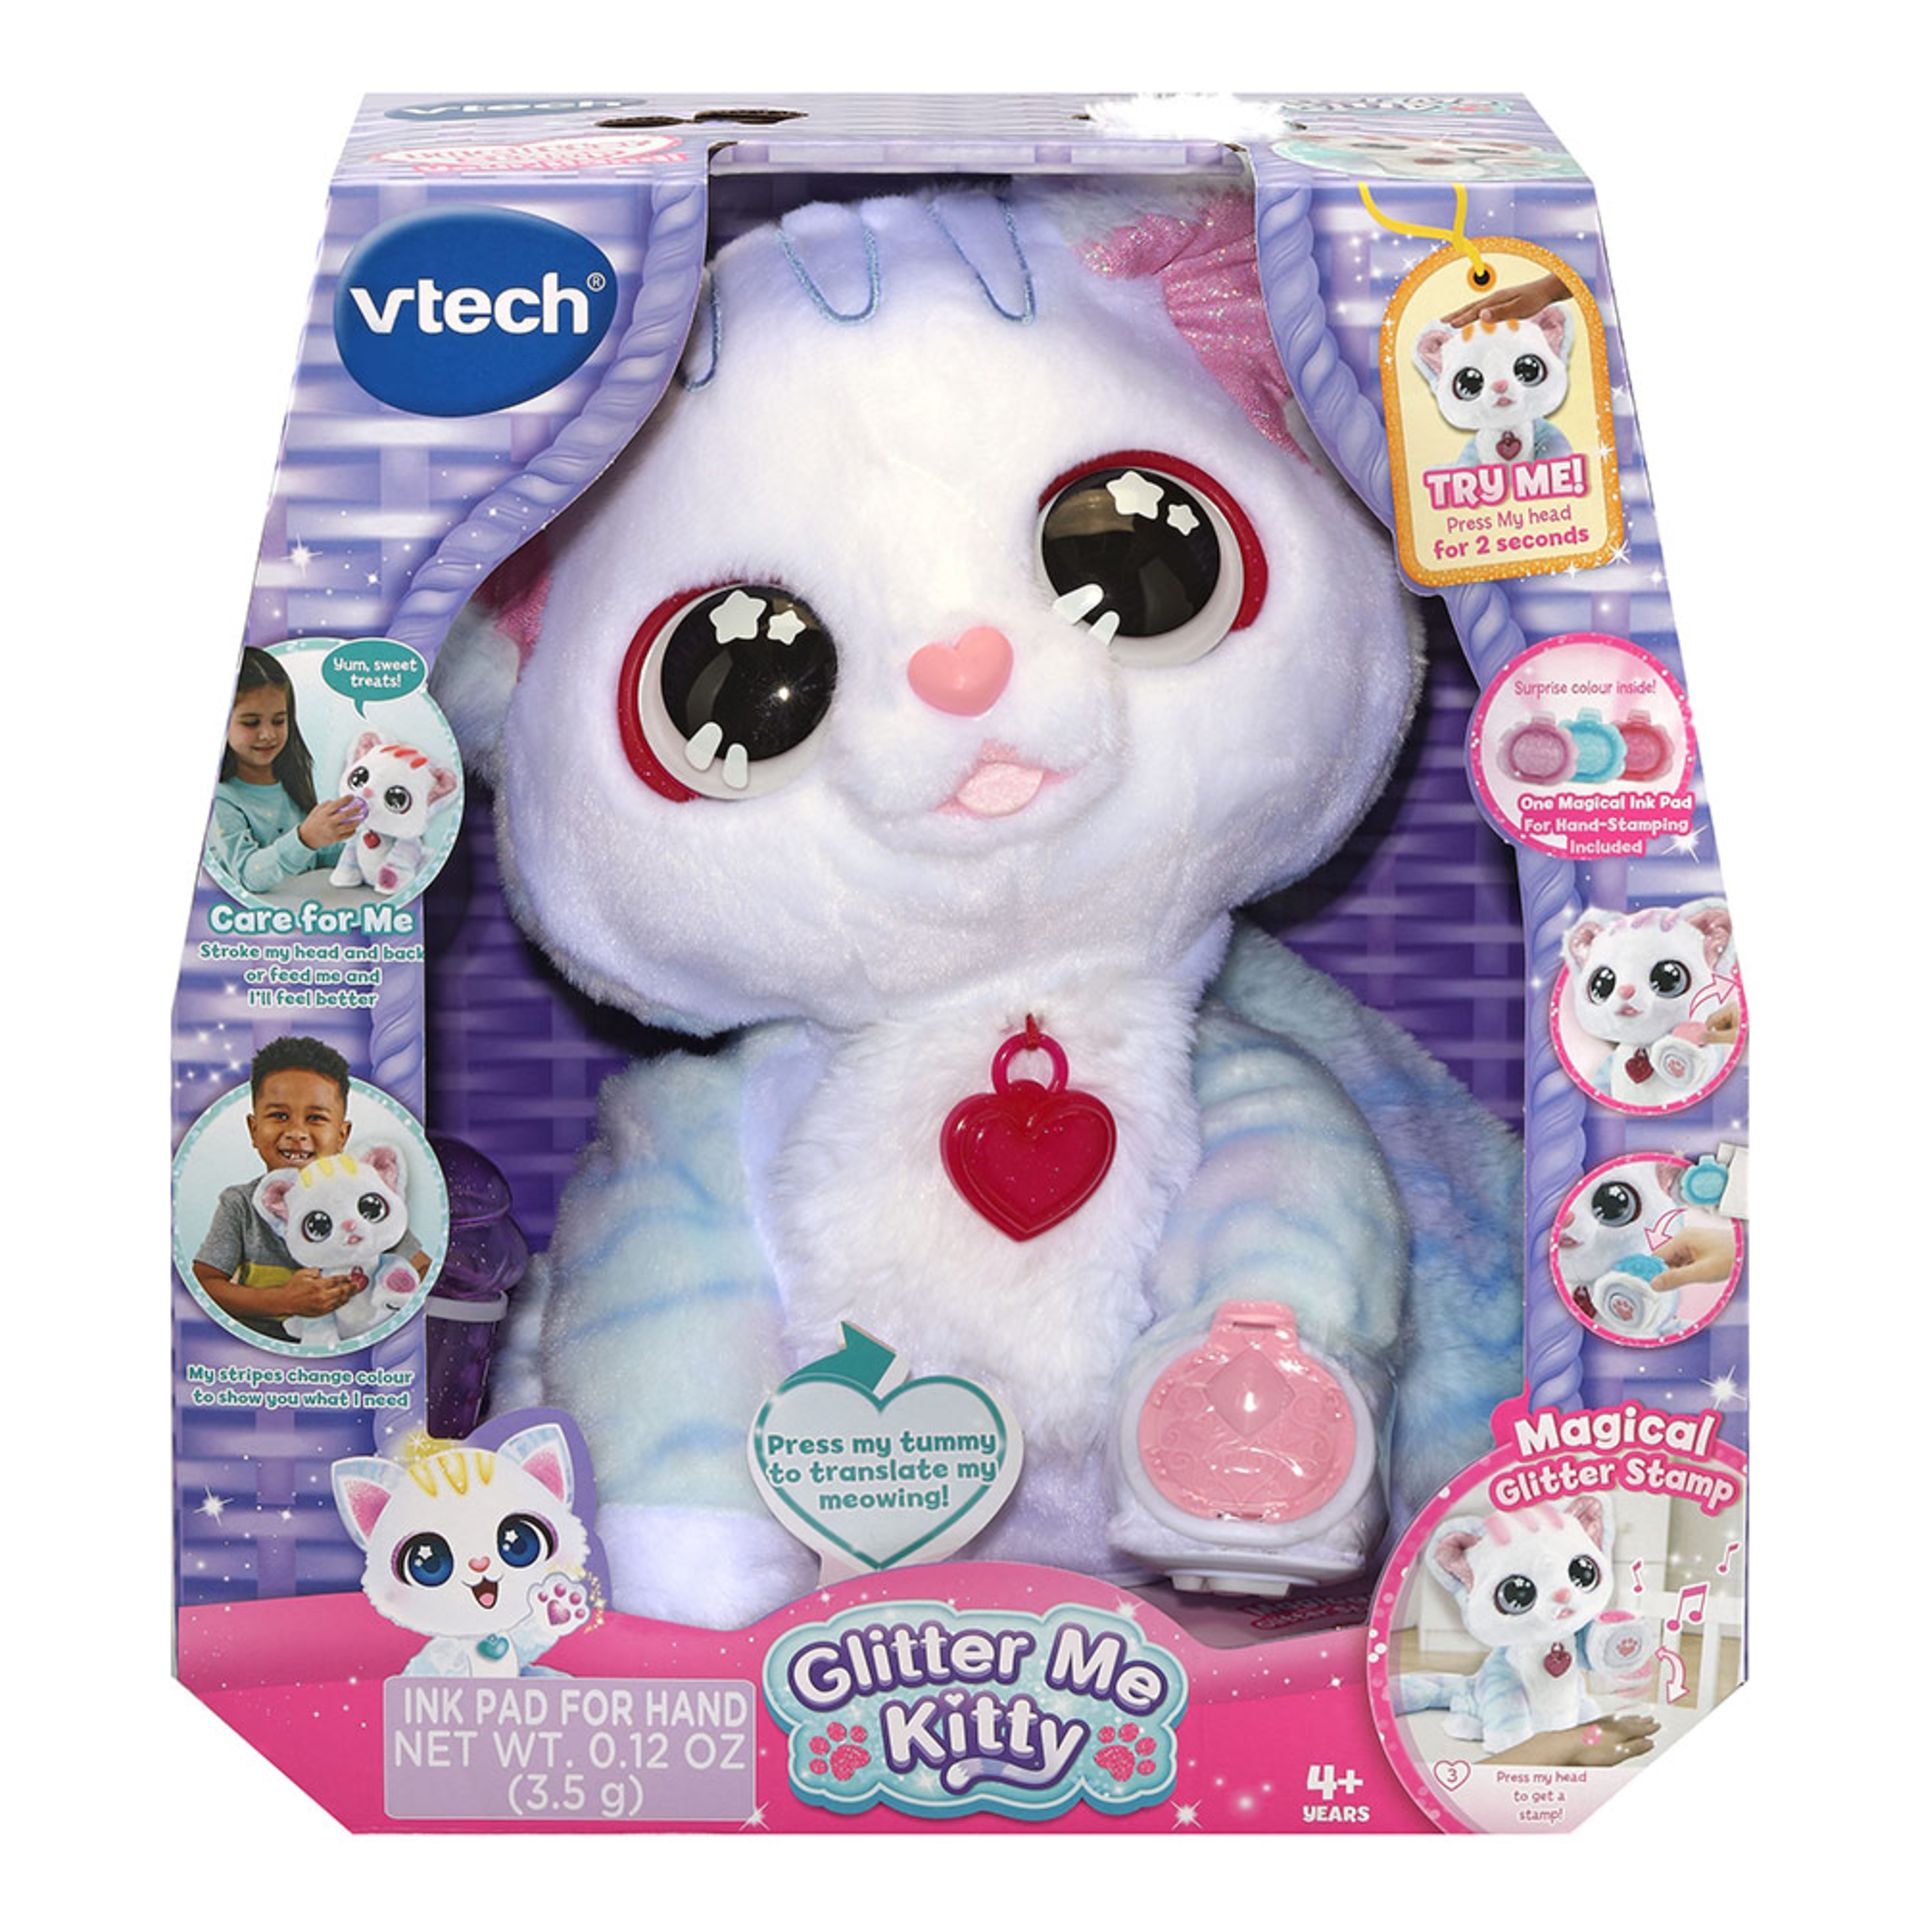 5x Toy Items. 1x Vtech Glitter Me Kitty RRP £42. 1x Vtech Baby Busy Musical Bee RRP £20.